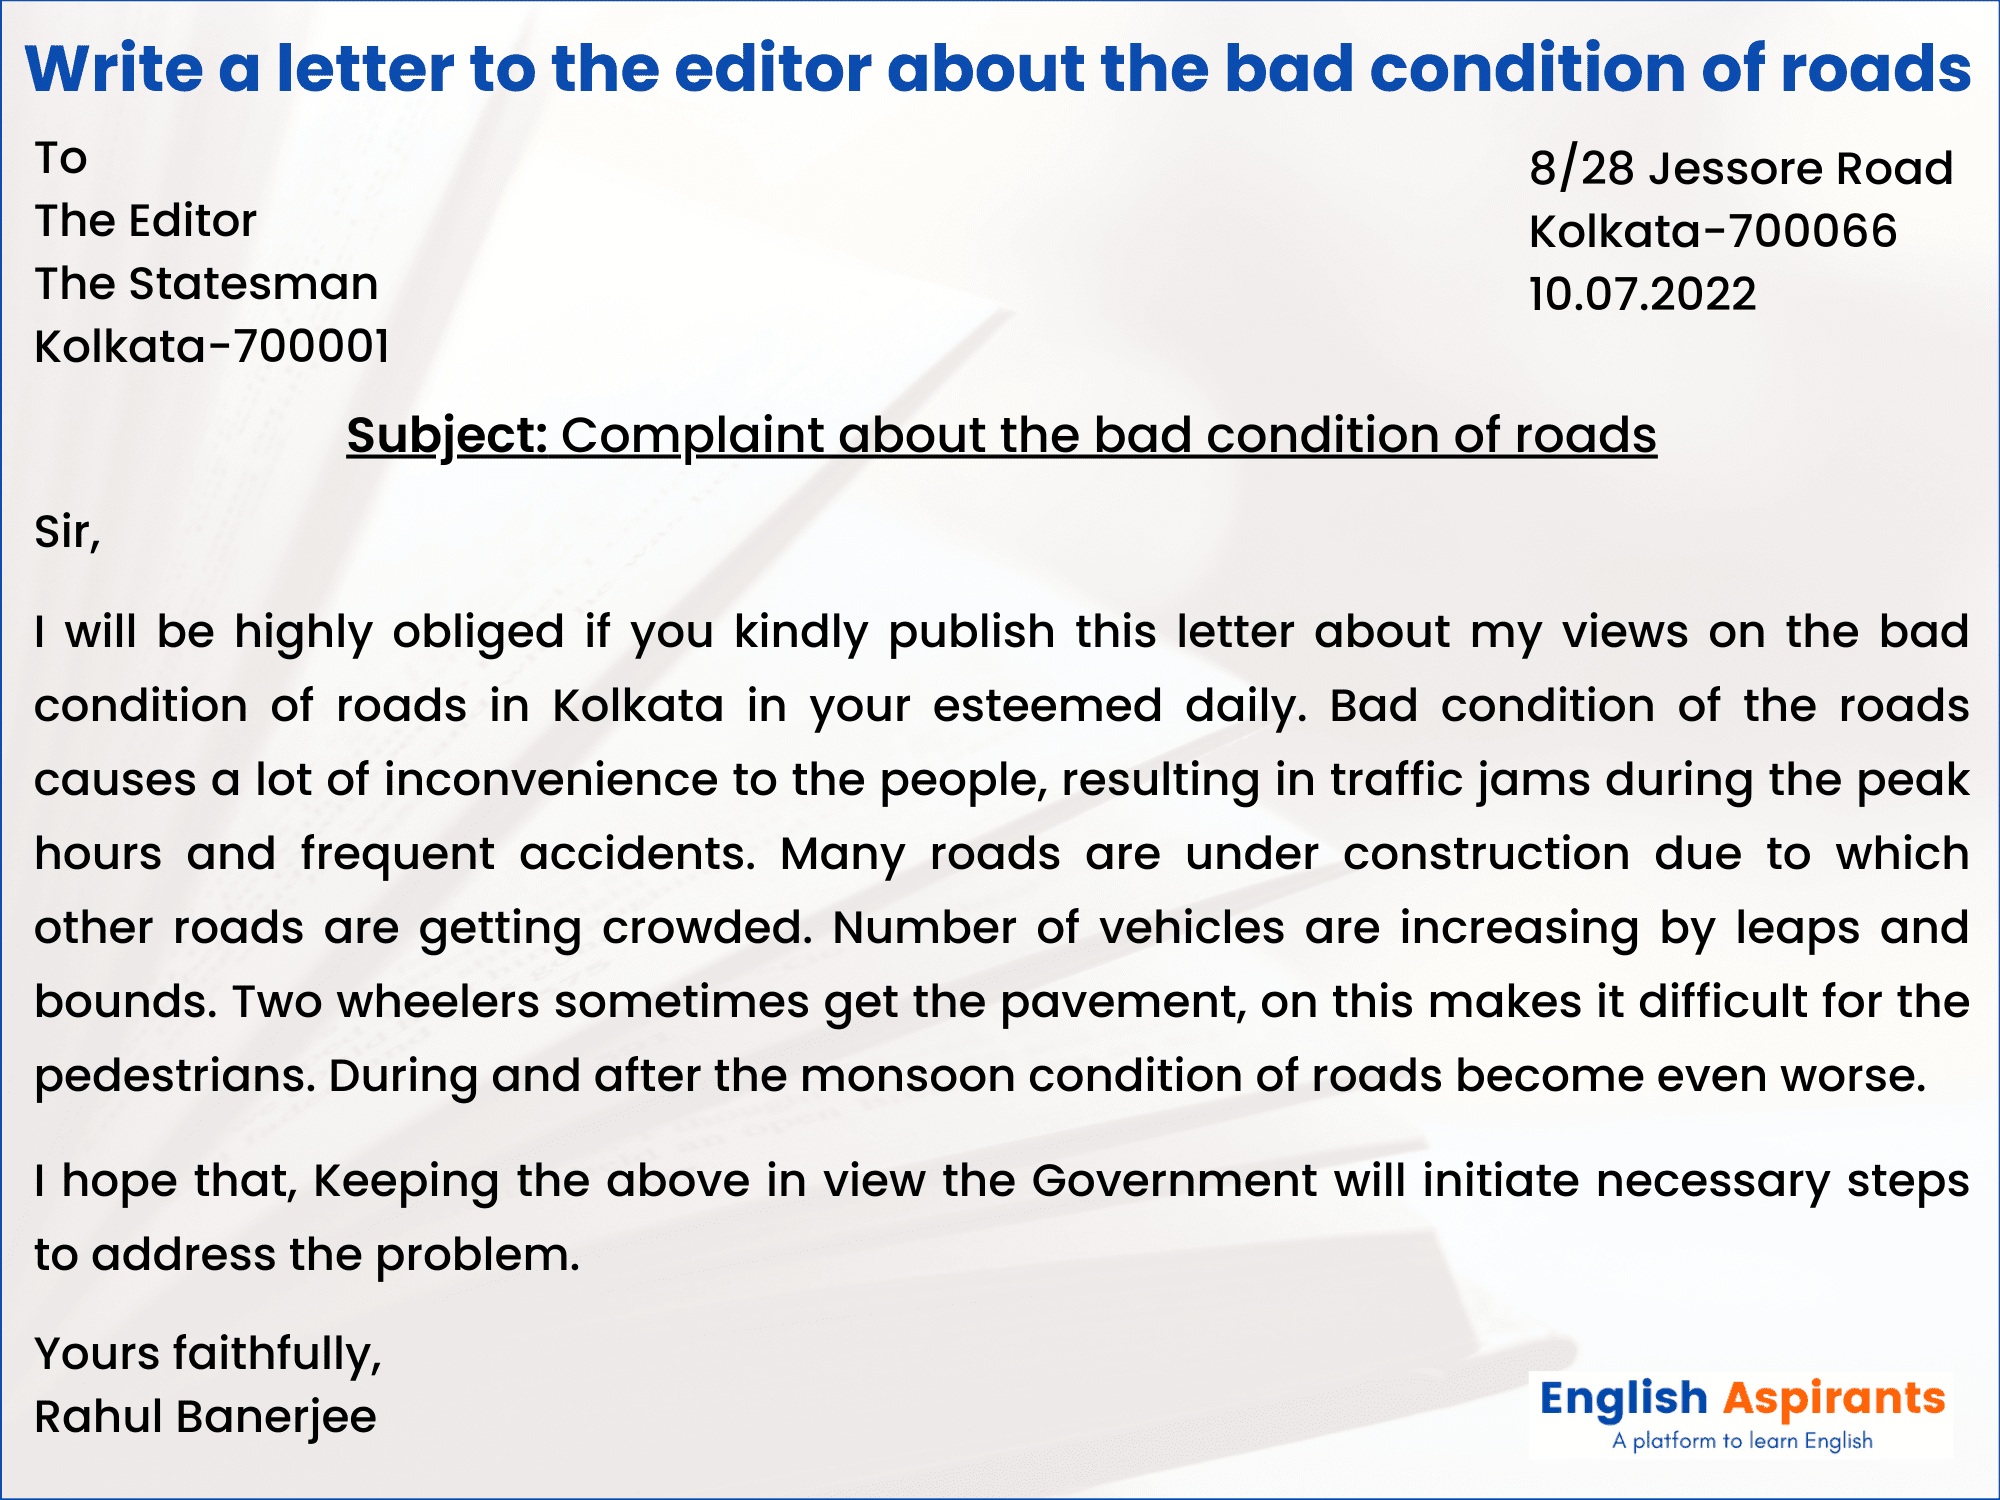 Write a letter to the editor of a newspaper about the bad condition of roads in your locality